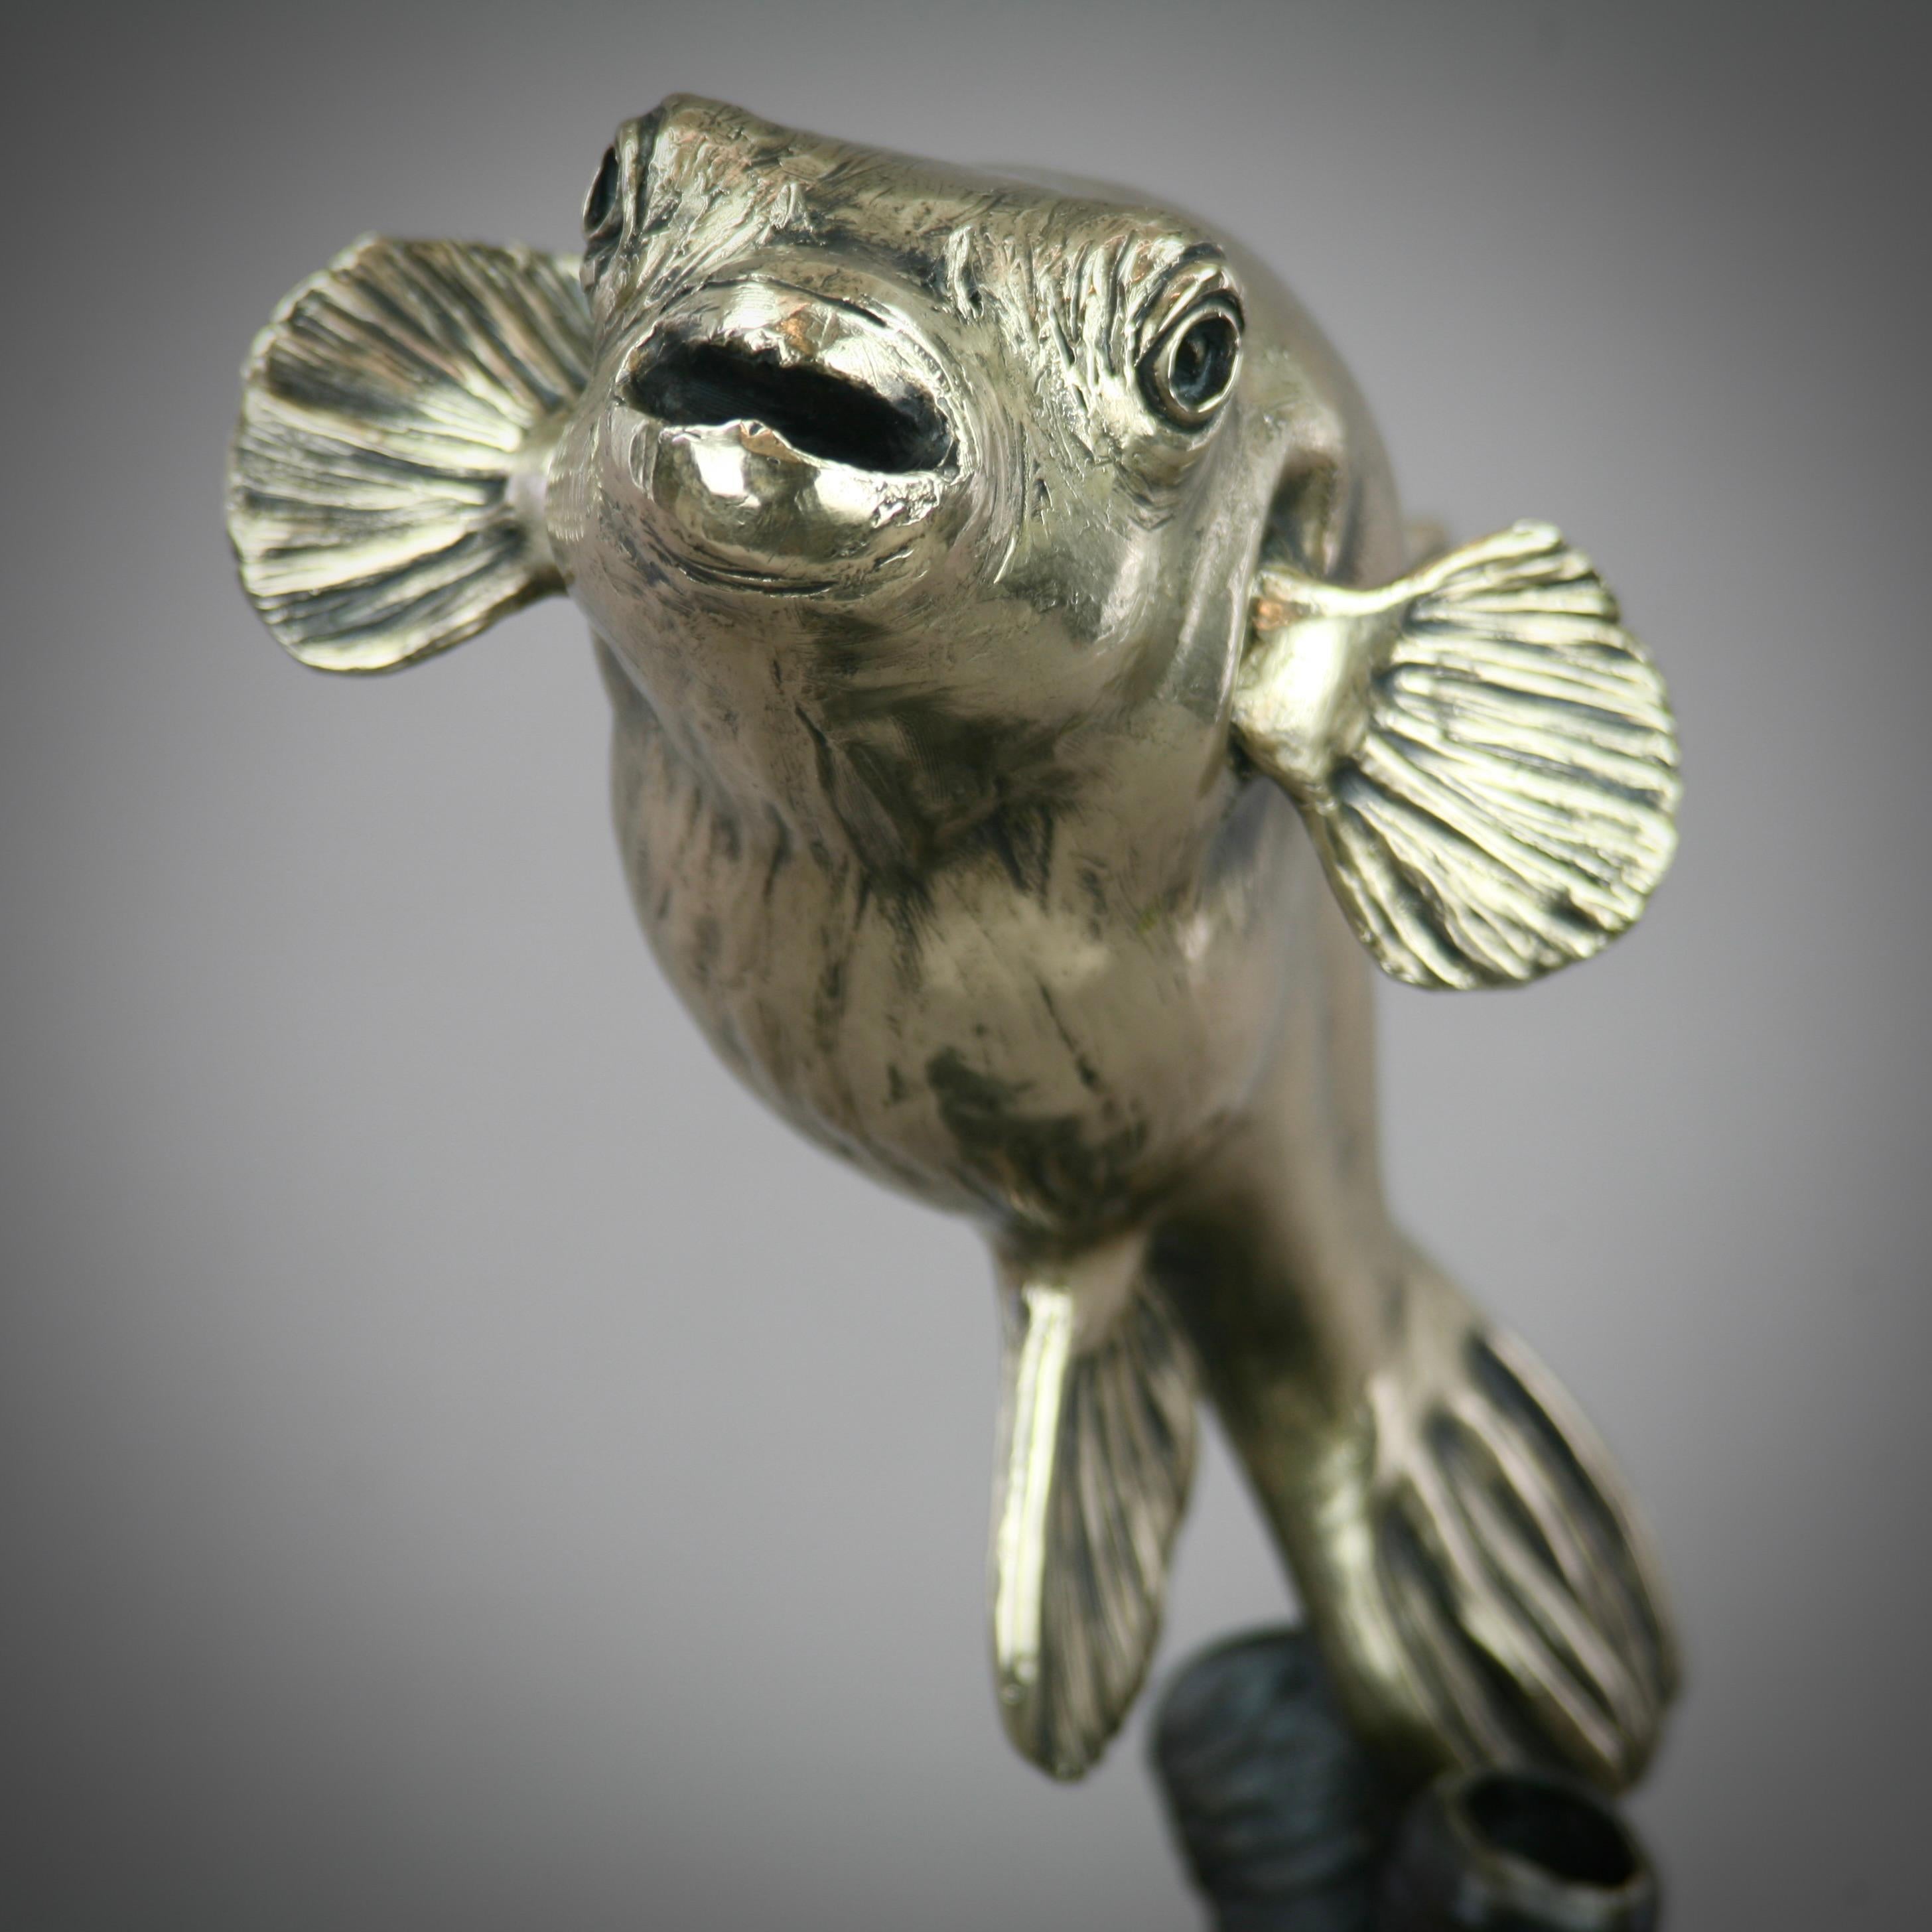 Bronze , Limited edition of 12

Step into the underwater realm with 